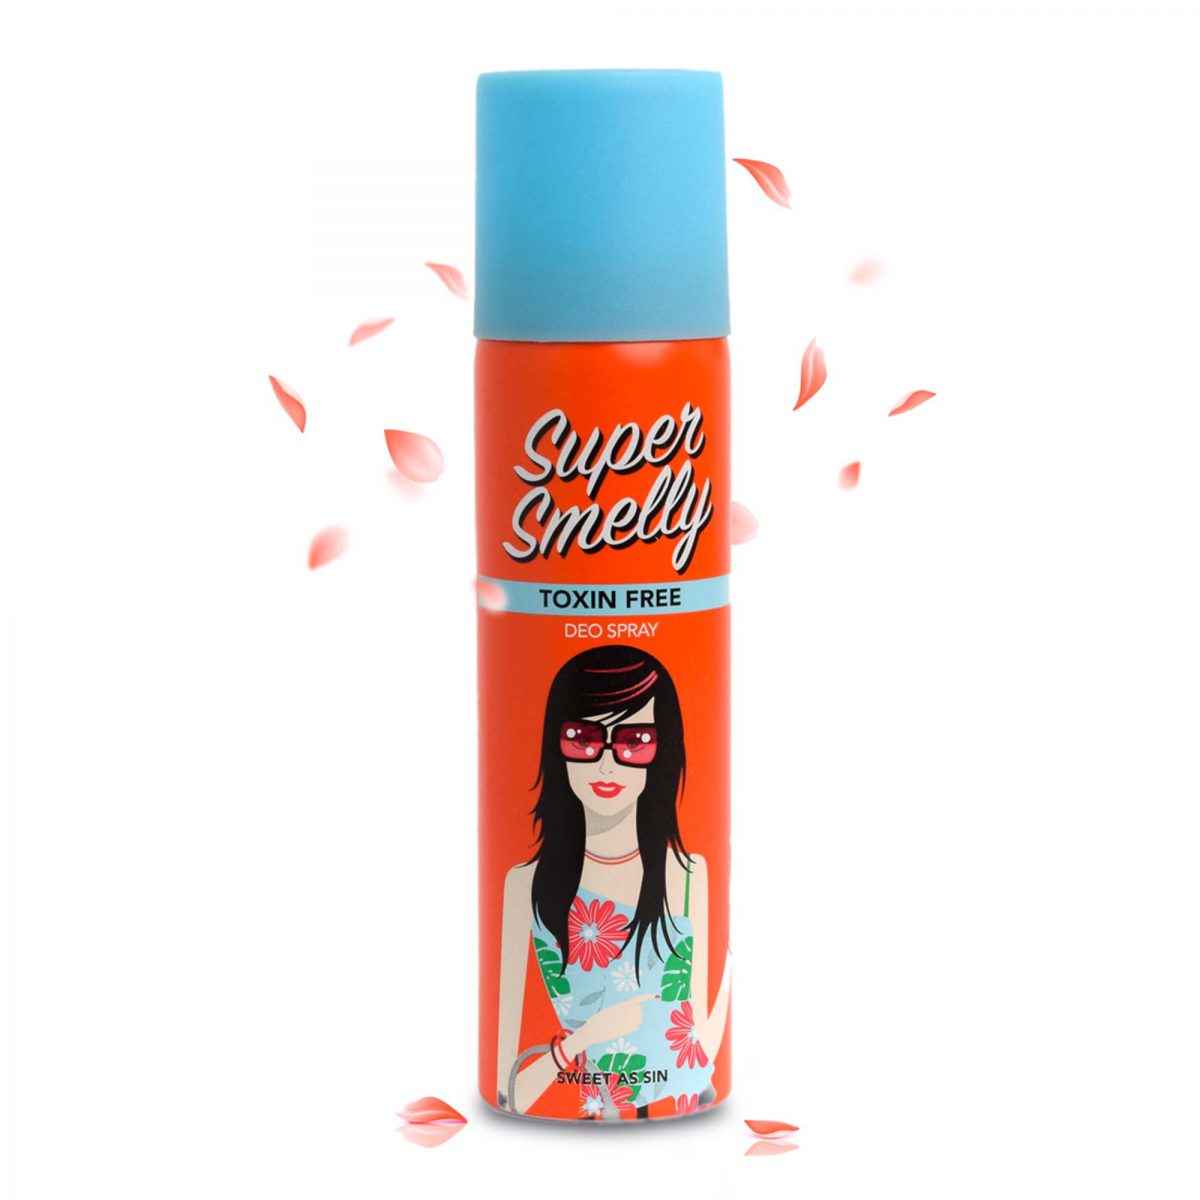 Sweet As Sin Deodorant Spray | best girls deodorant spray | best organic deodorant spray for teen | best deo of teenager | natural deodorant for women | buy organic deo online from supersmelly |